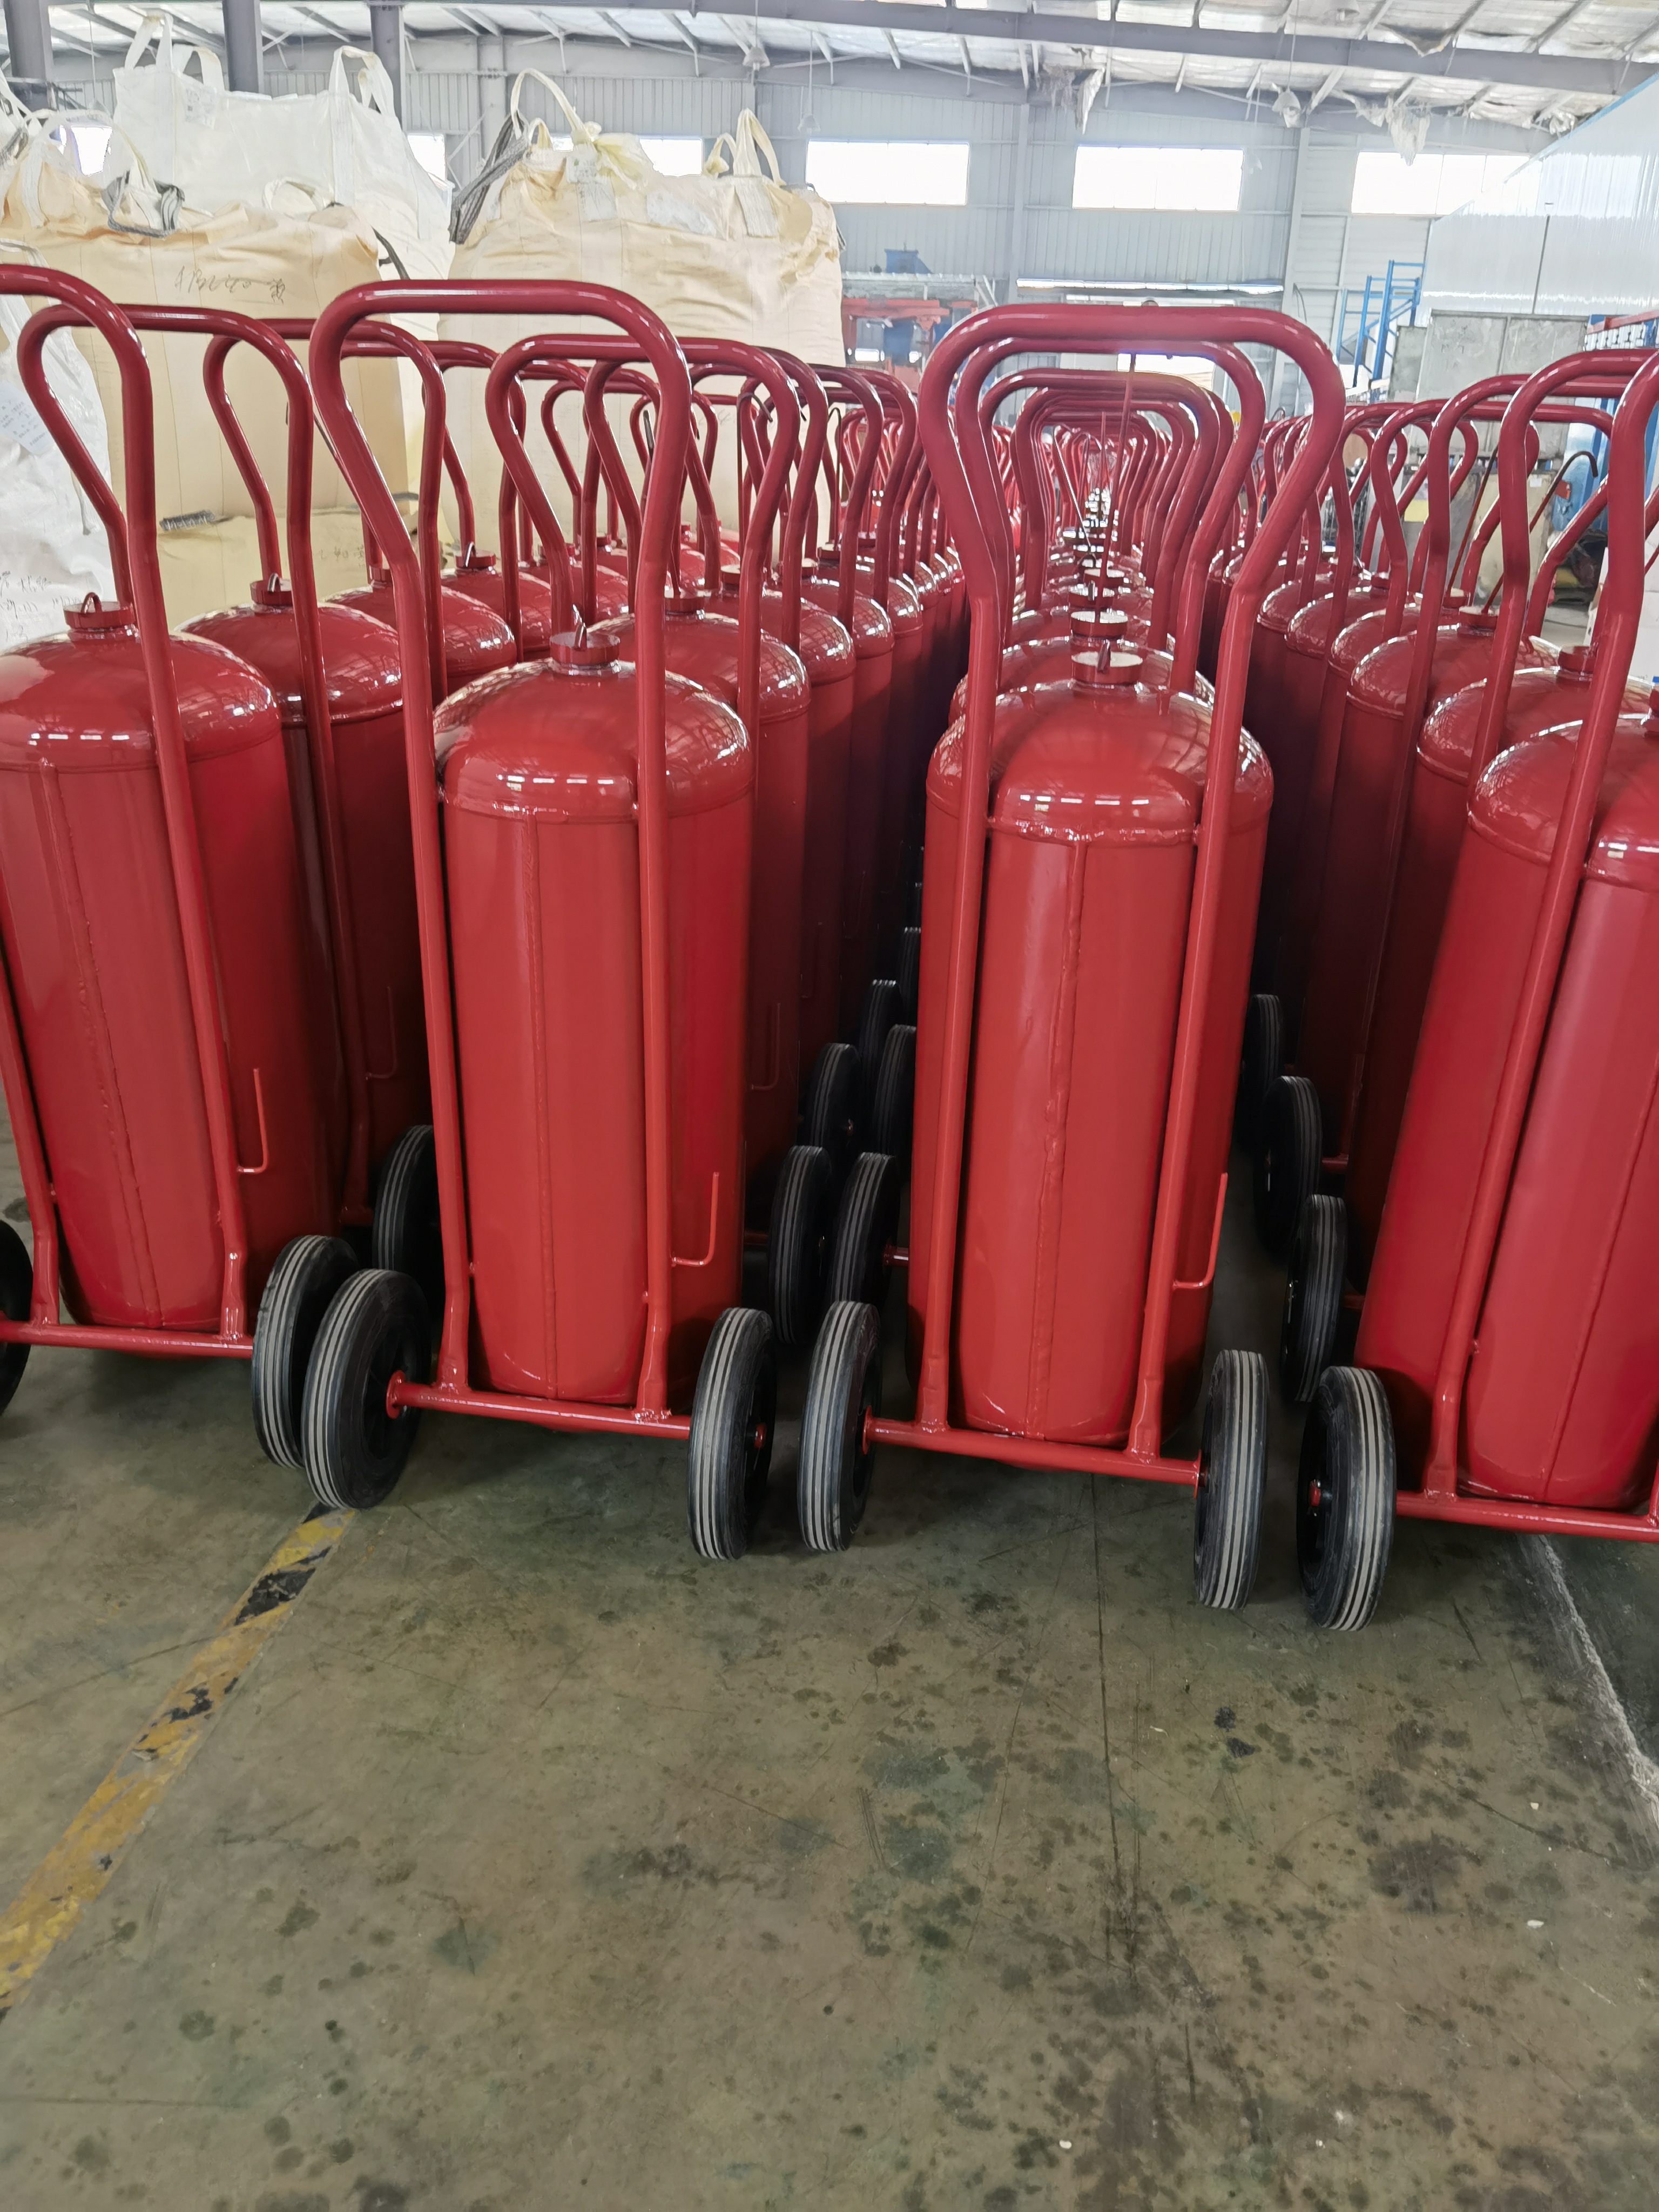 Dry Powder Fire Extinguisher for Oil With Brass Valve